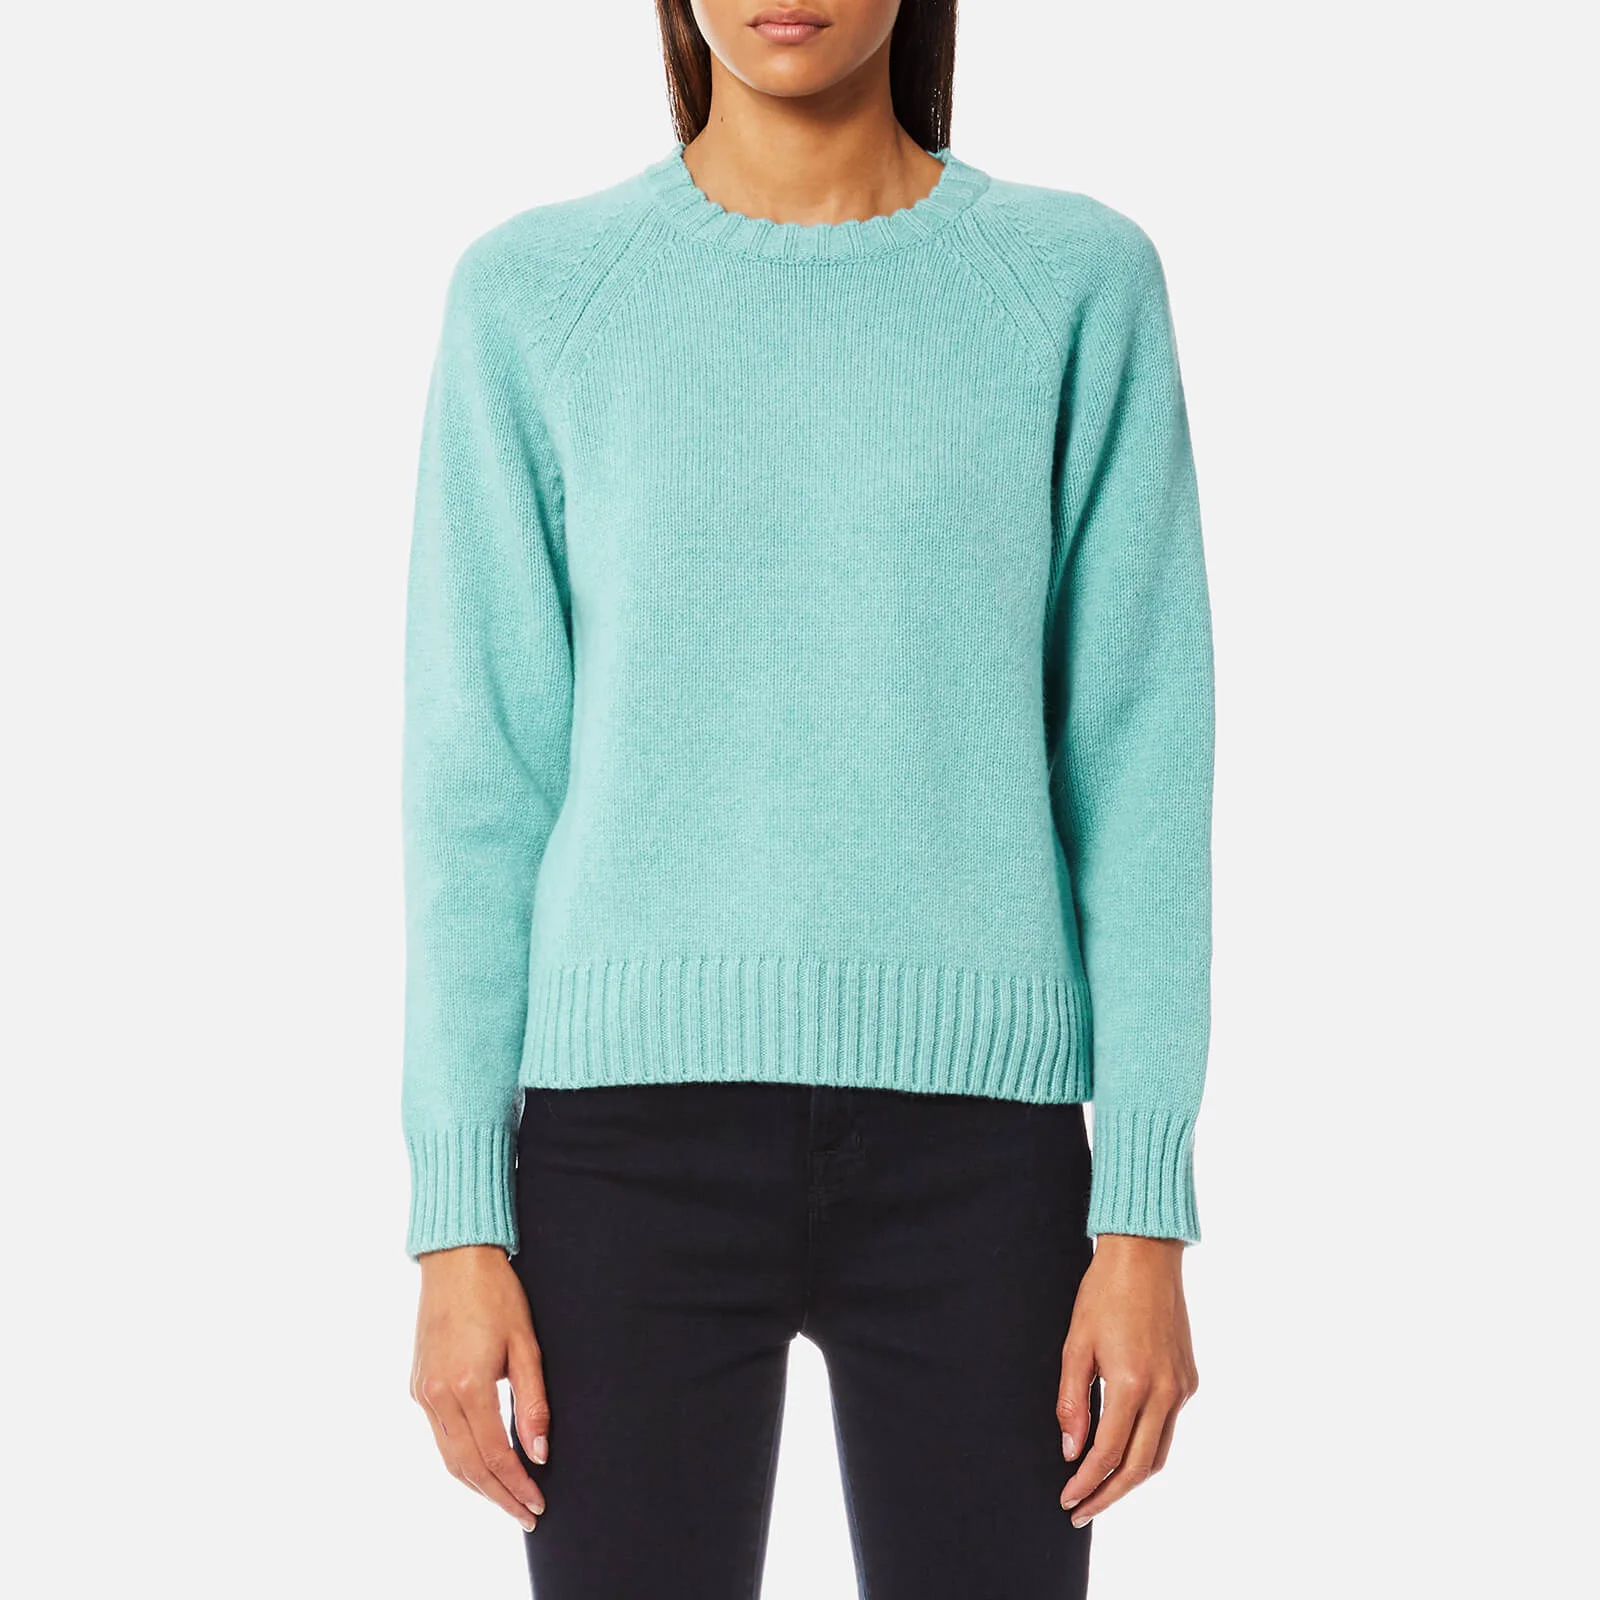 A.P.C. Women's Stirling Jumper - Turquoise Image 1